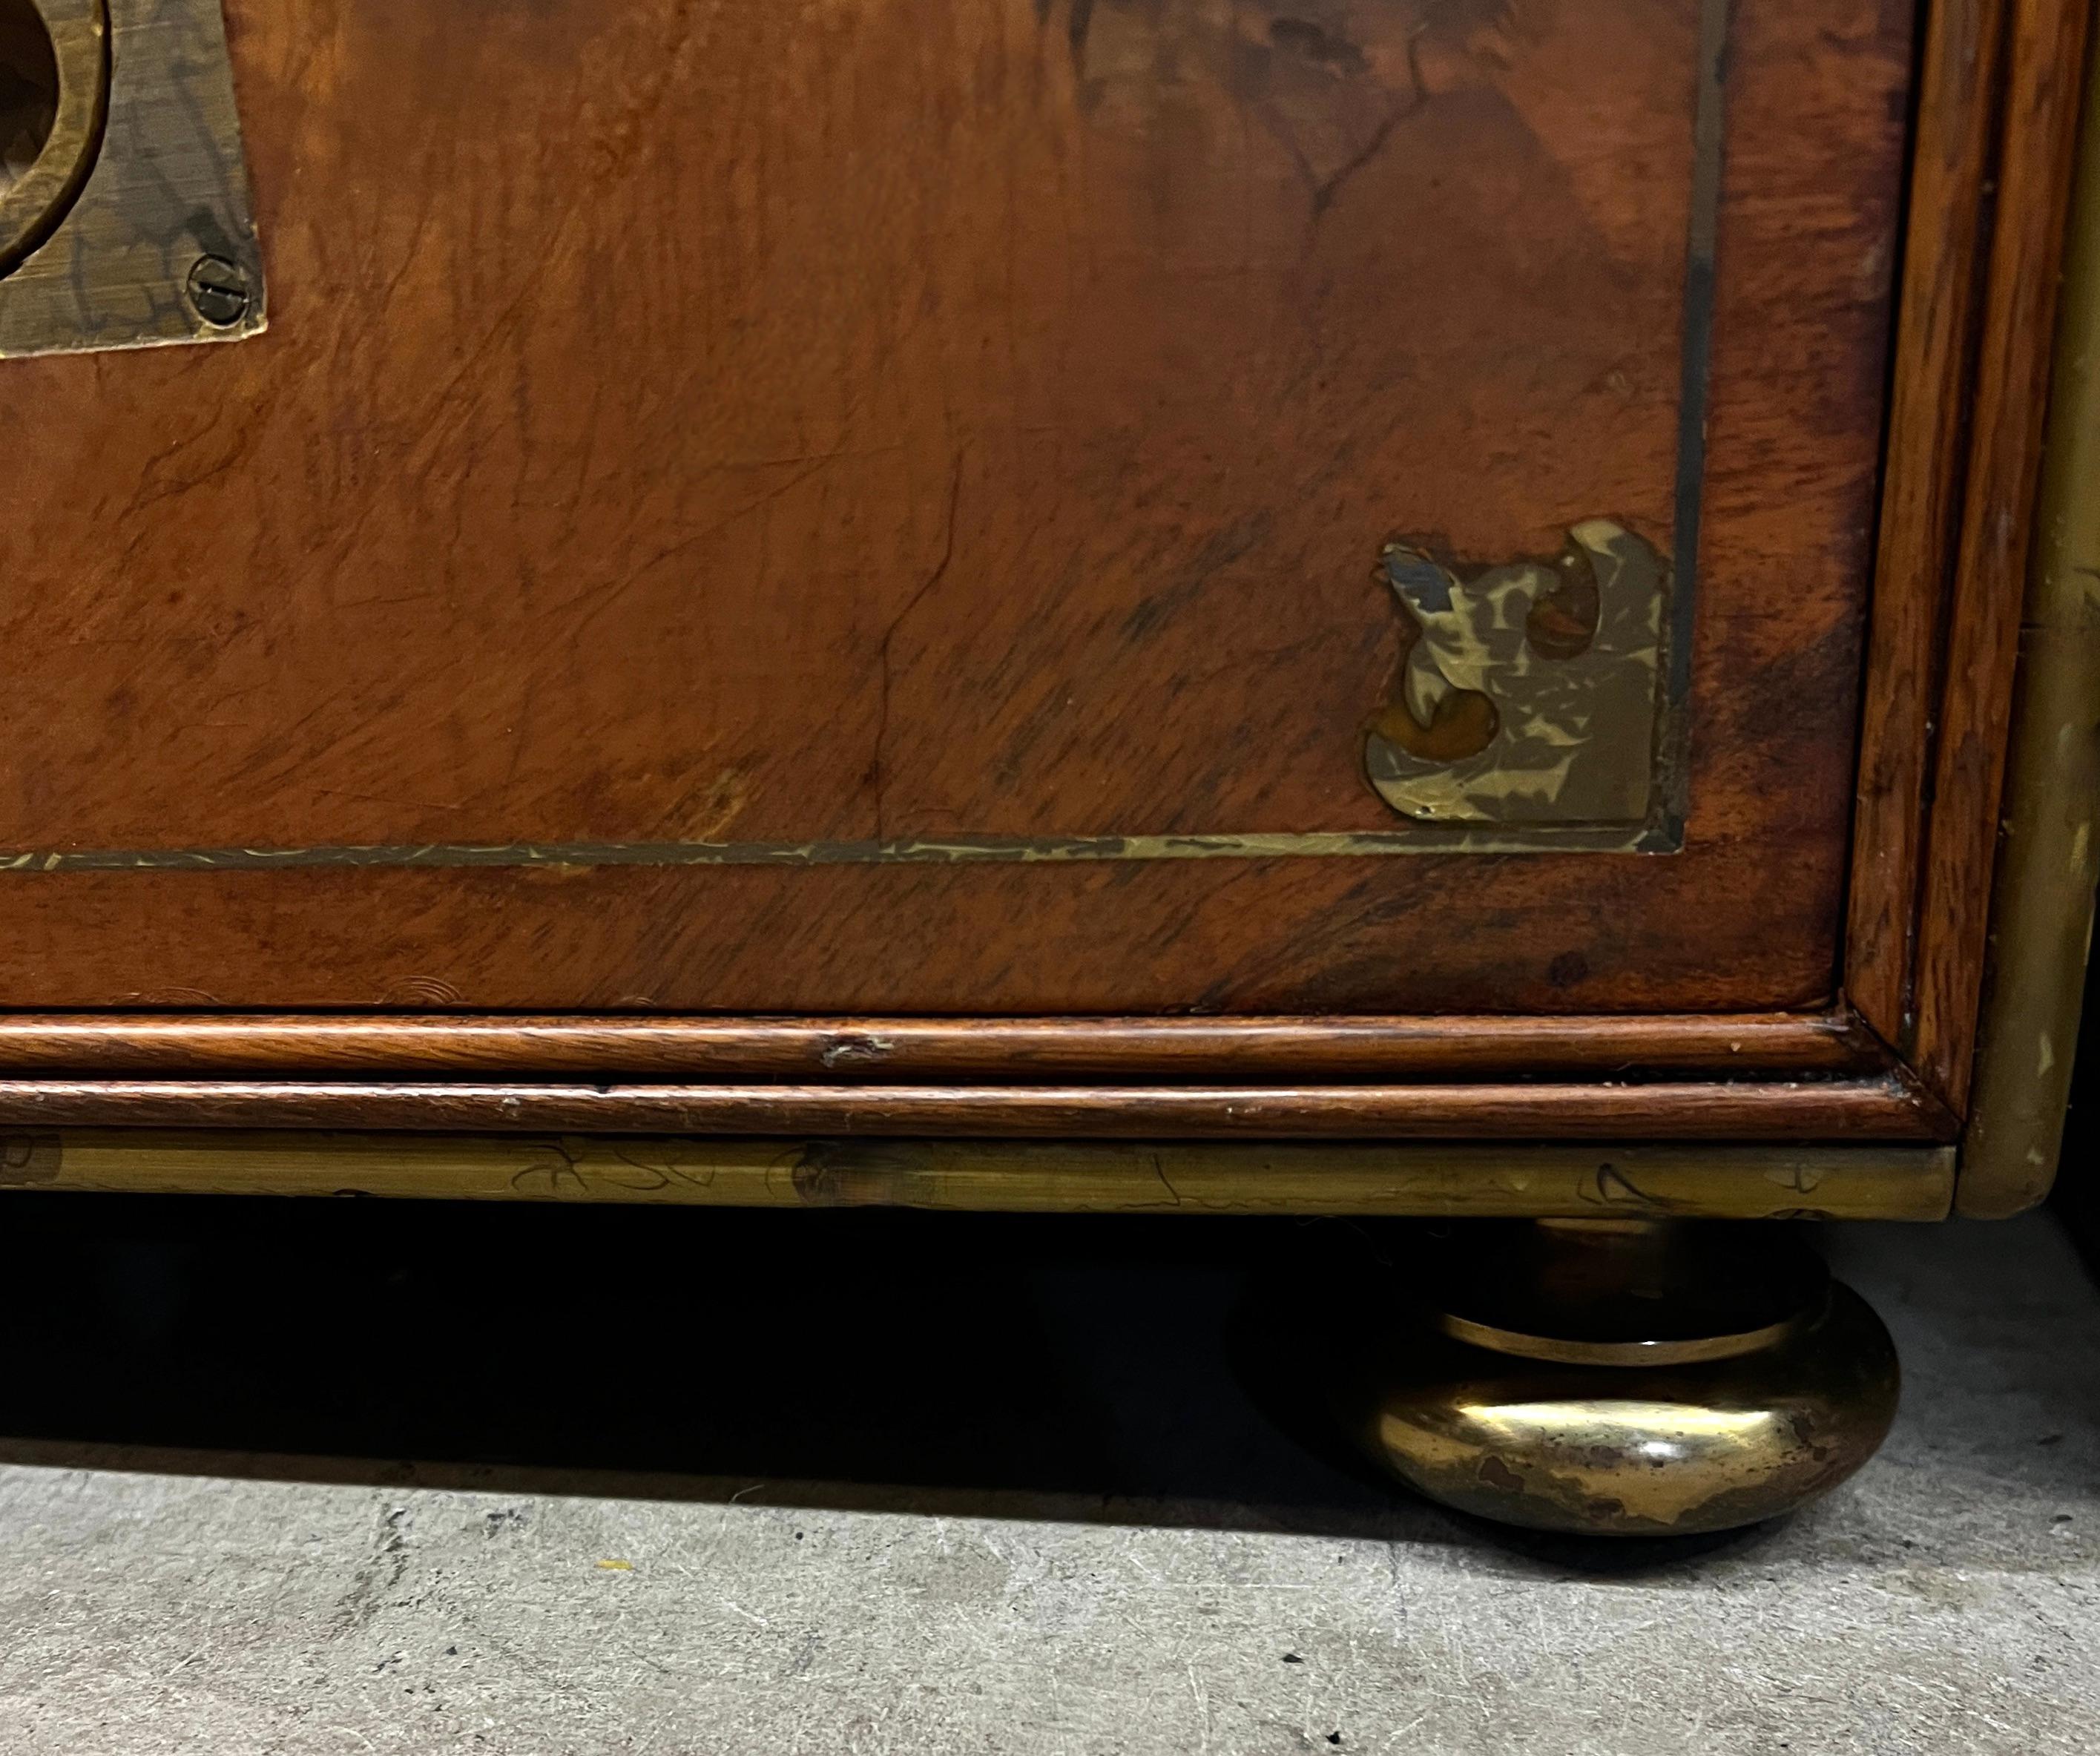 Anglo Raj Regency Campaign Chest with Desk Trimmed in Brass Banding Accents 1811 For Sale 1